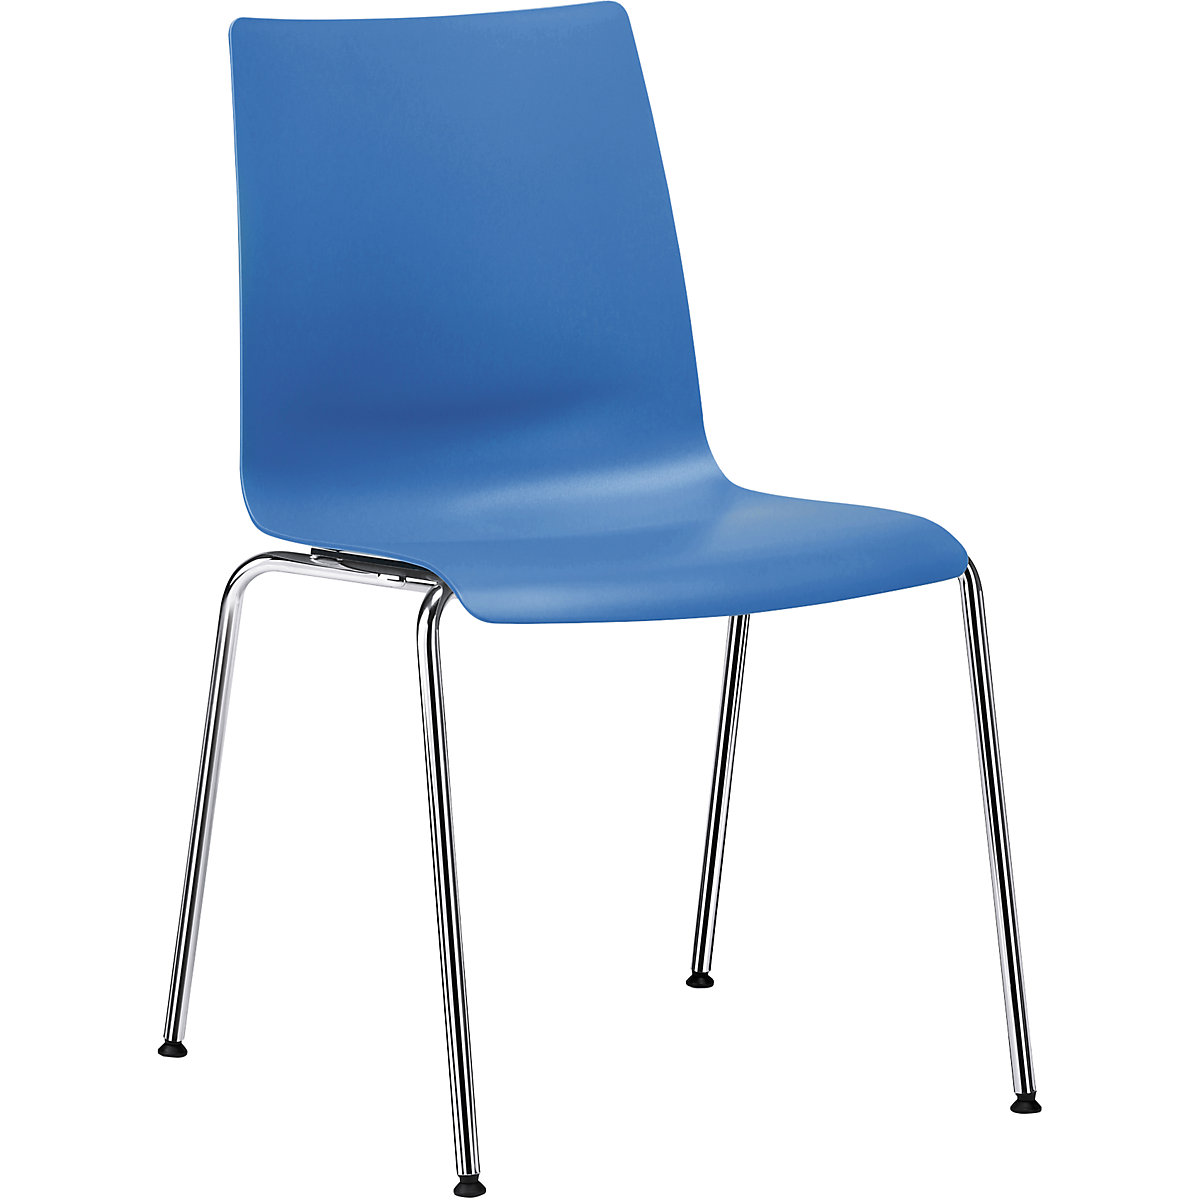 interstuhl – SNIKE contoured plastic chair, one piece seat made of PP, blue